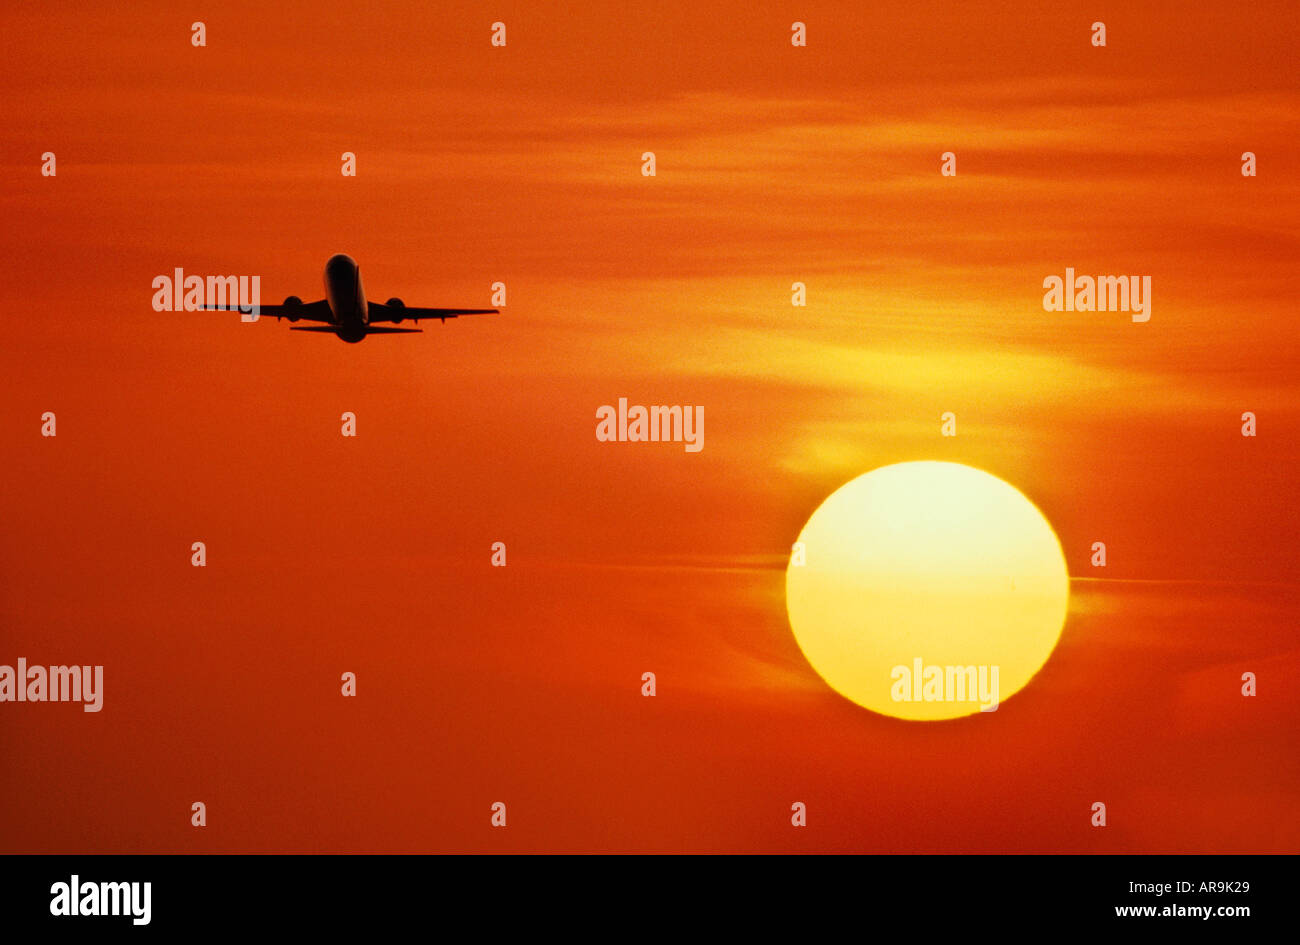 airliner Boeing 737 jet in the air on take off in an golden orange cloud sky at sunset sunrise dusk showing jet thrust exhaust Stock Photo